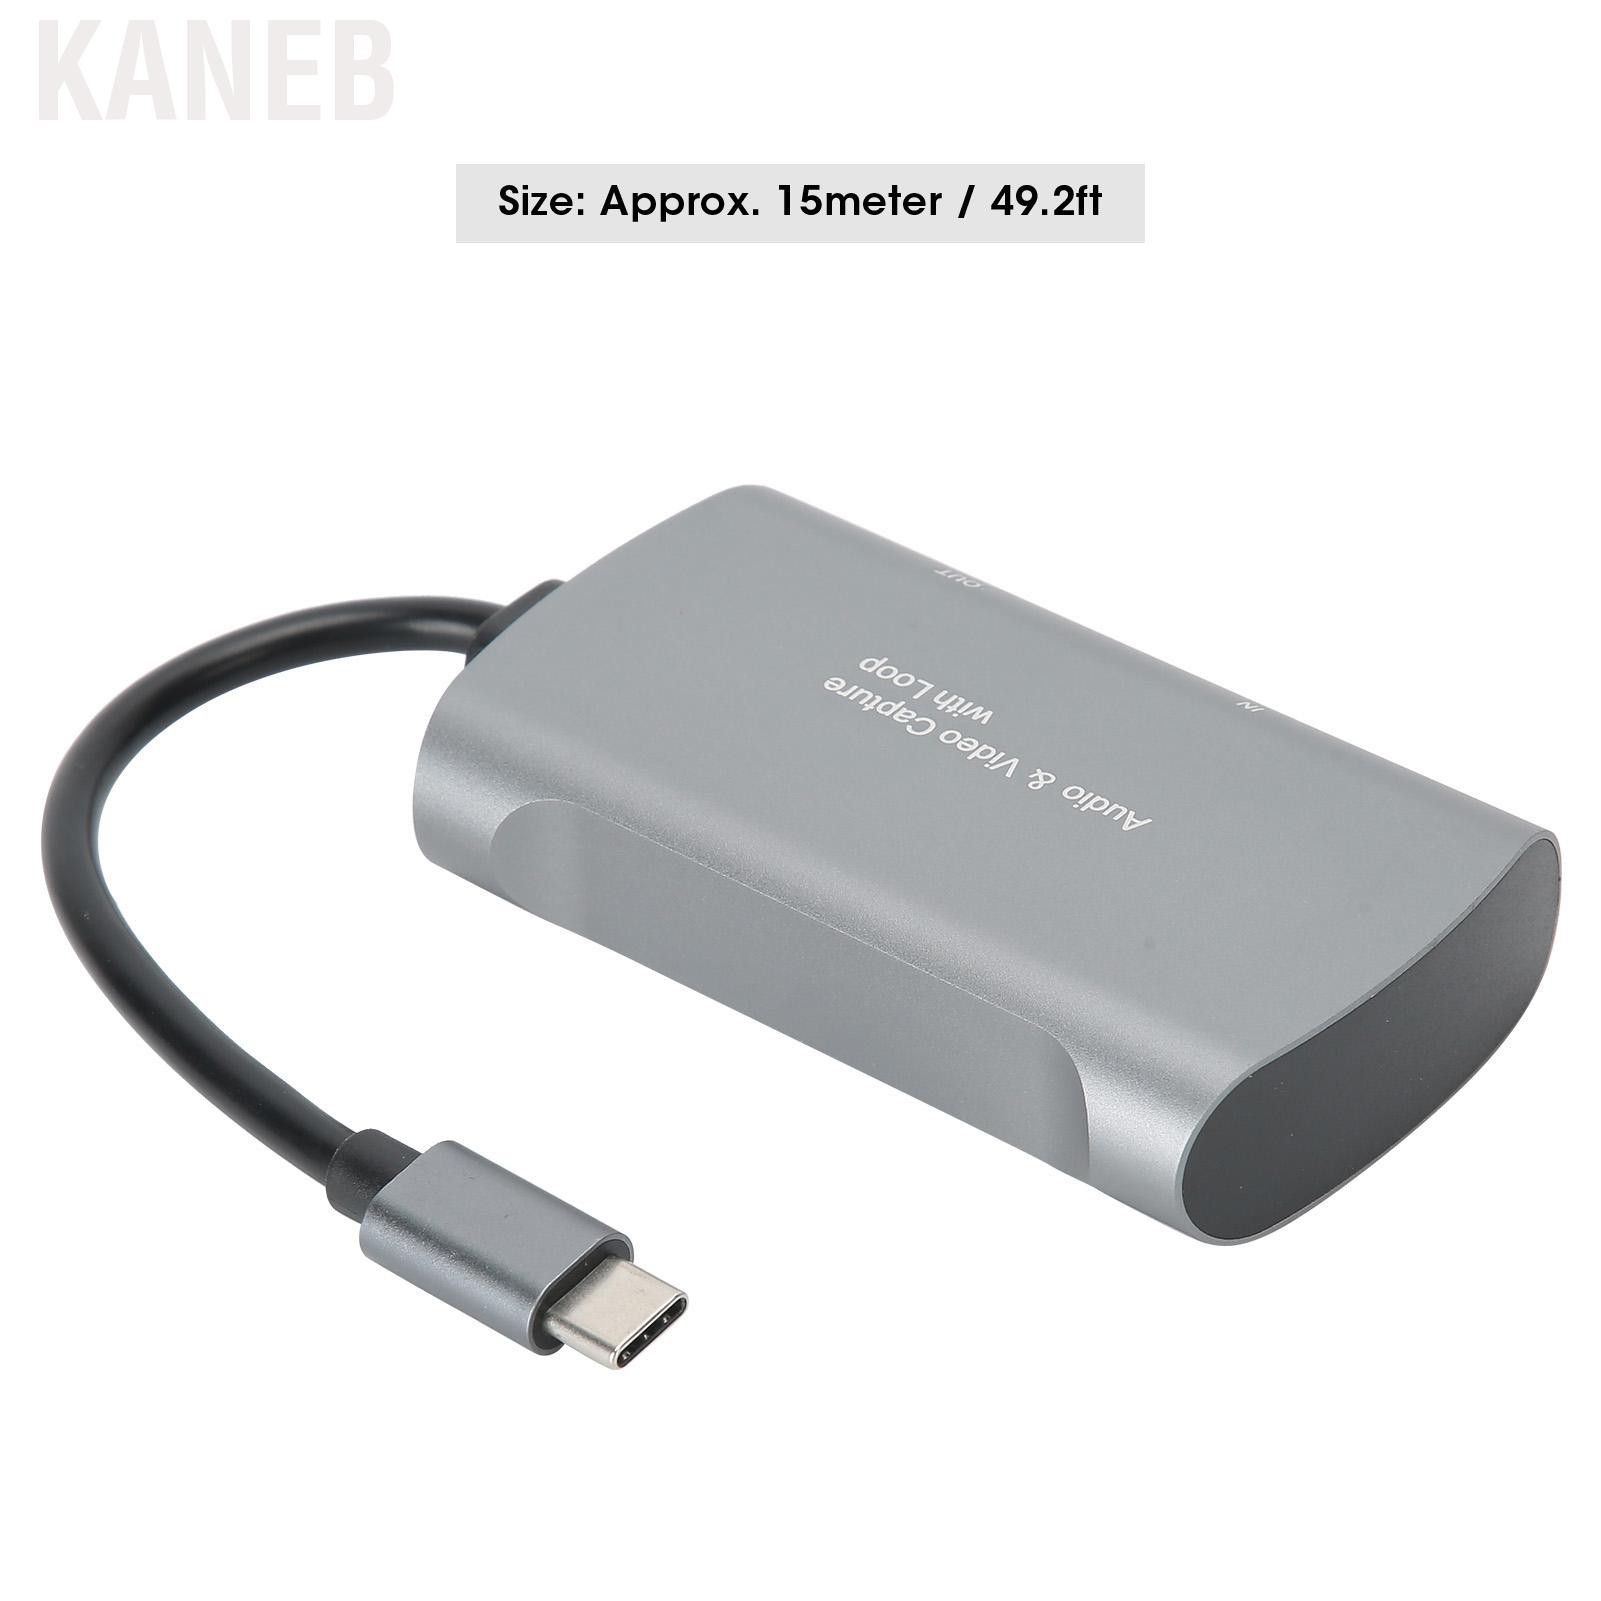 Kaneb Video Capture Card  Small Size Ultra‑thin Portable HDMI/F Maximum Input Conference Recording